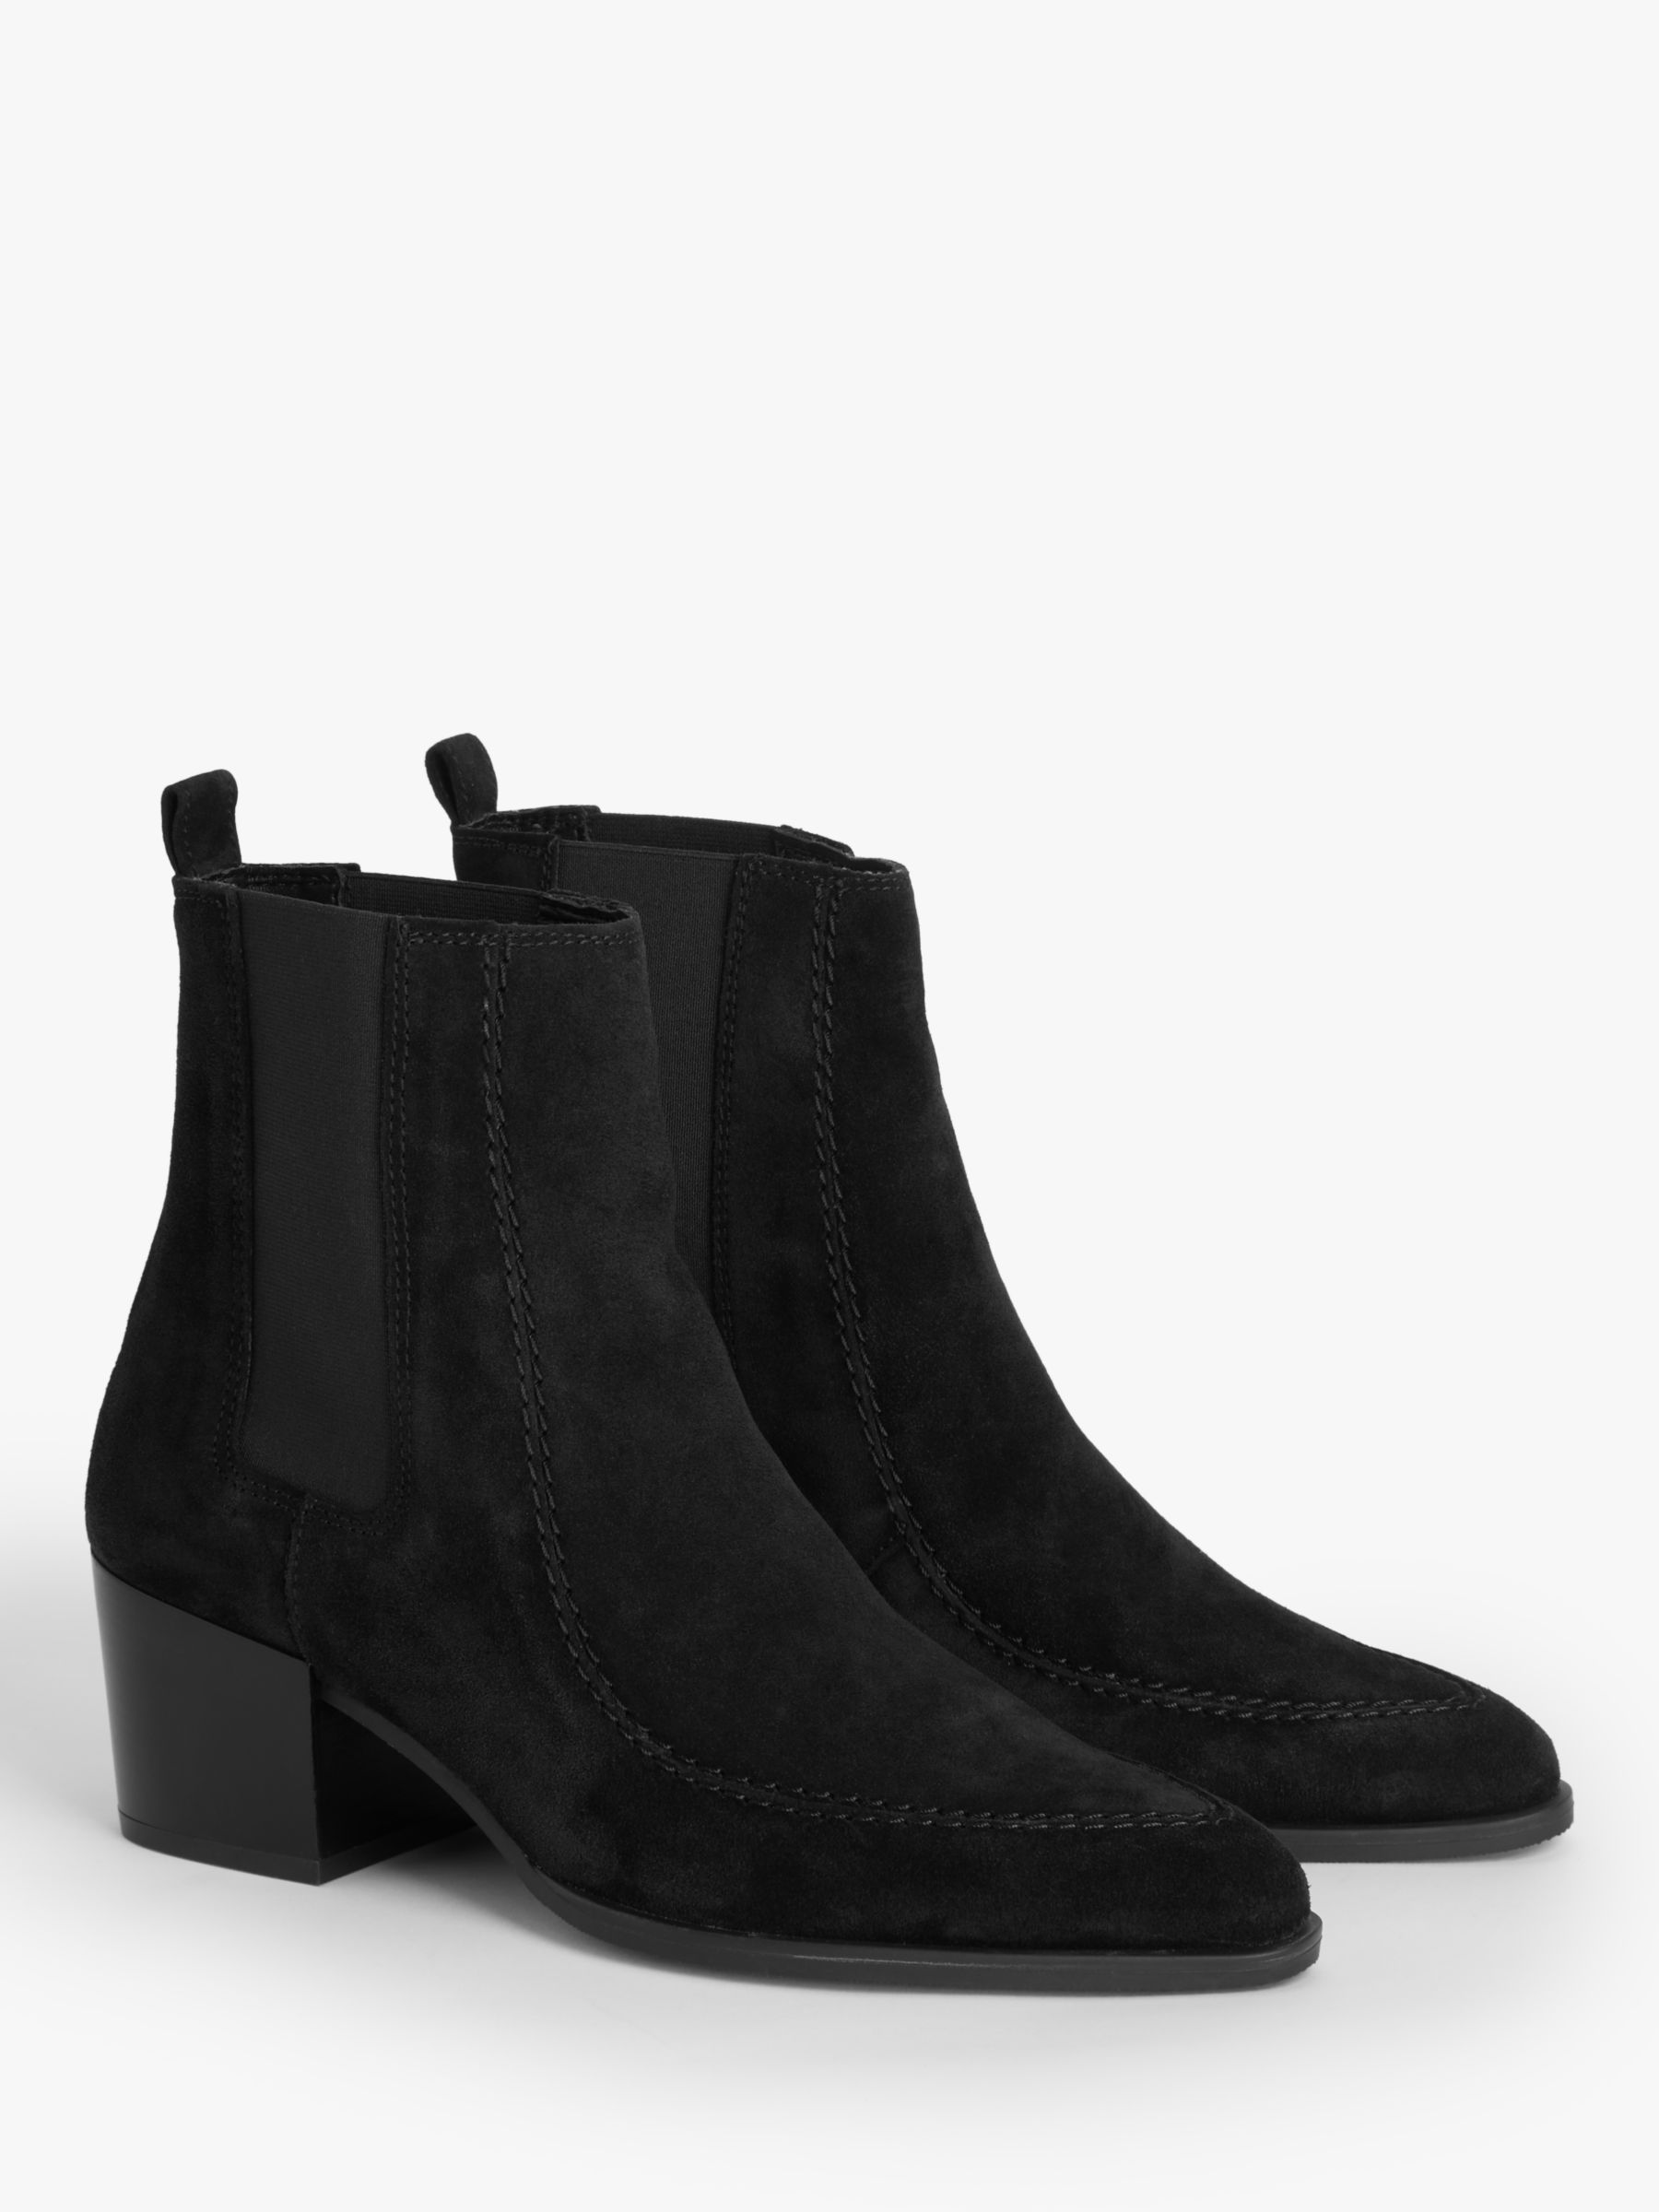 Kin Patch Suede Western Boots, Black